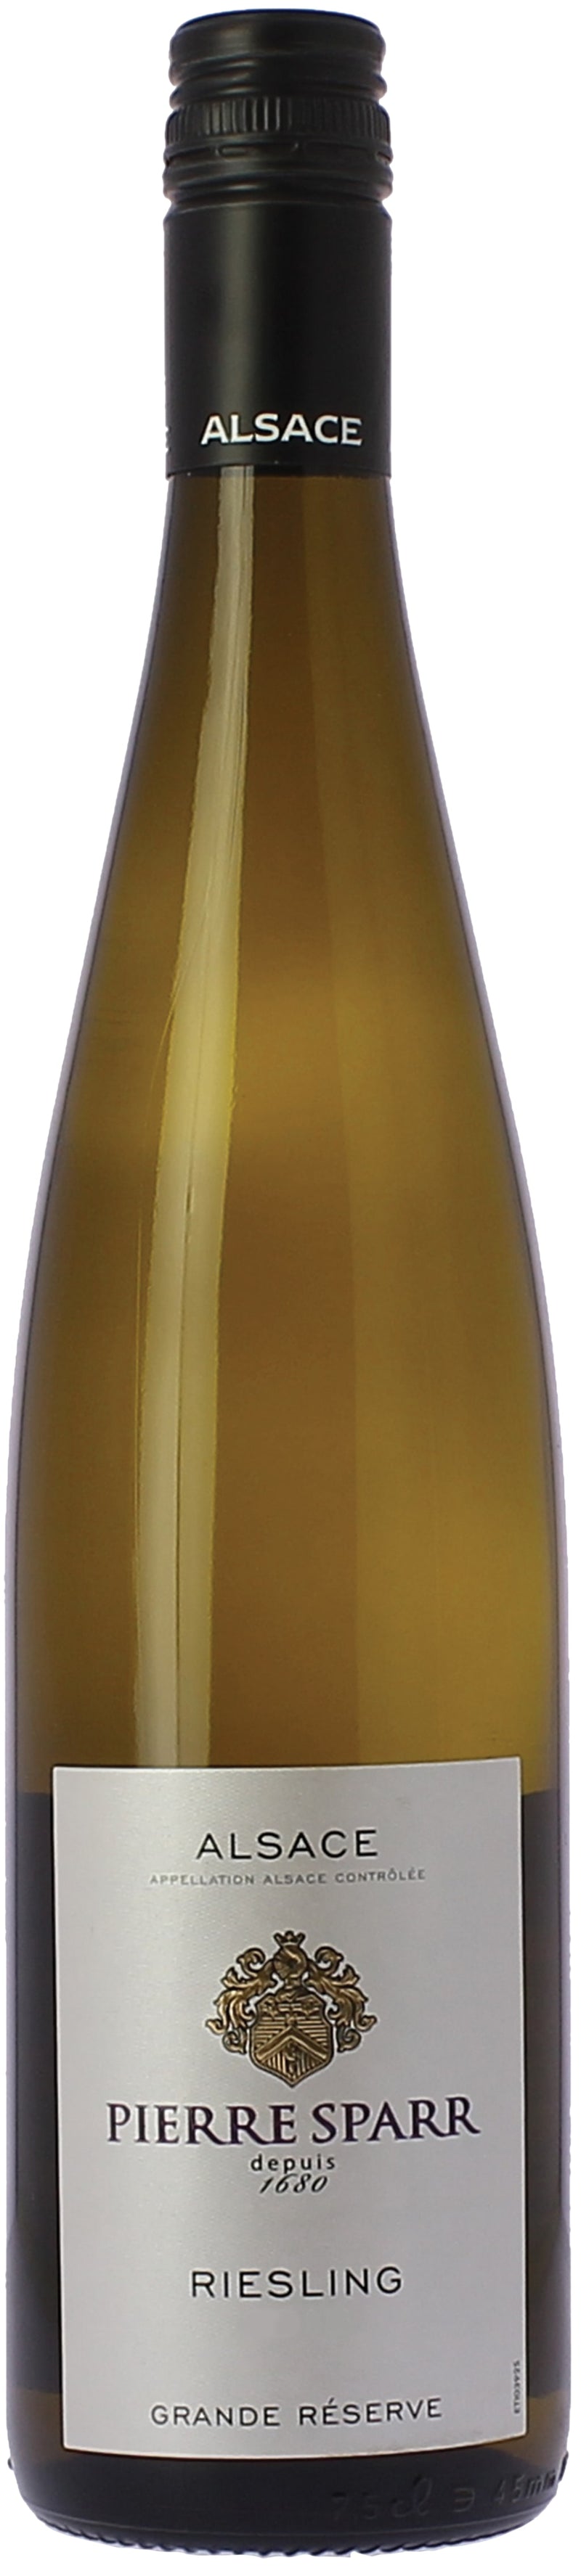 PIERRE SPARR RIESLING